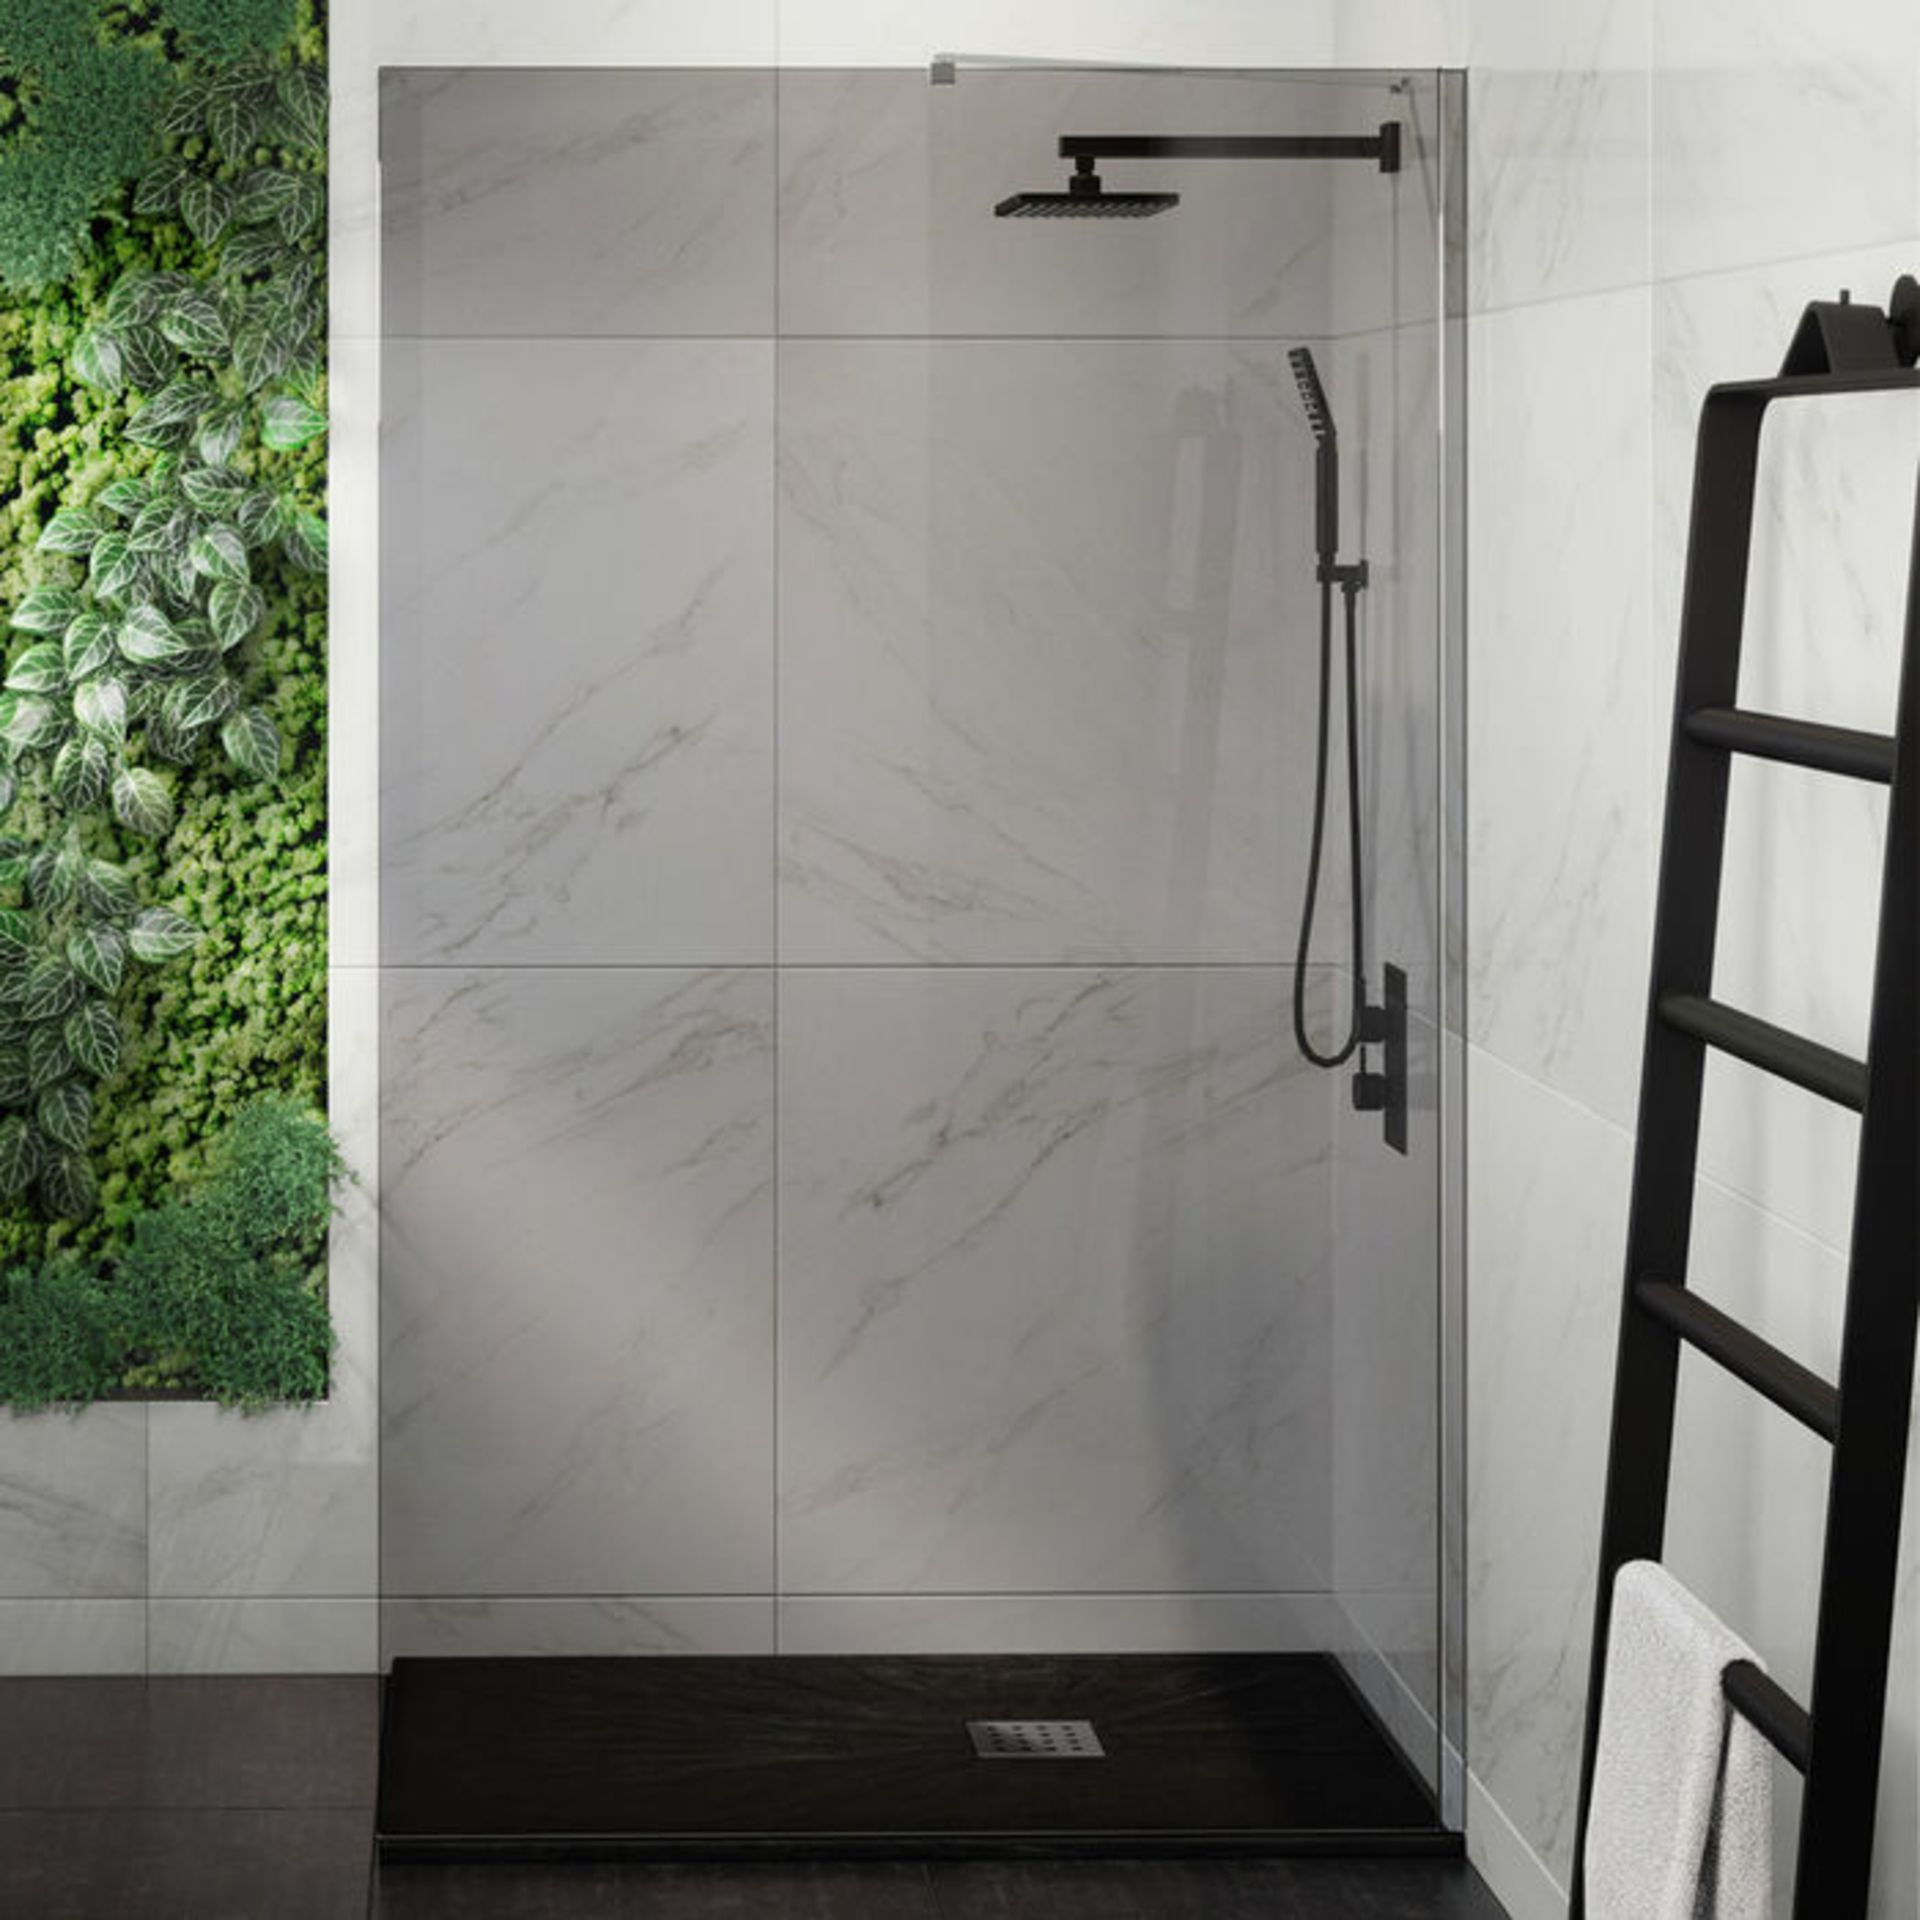 (Z37) 1200mm - 8mm Designer EasyClean Smoked Glass Wetroom Panel. RRP £499.99. Stylish smoked ... - Image 3 of 4